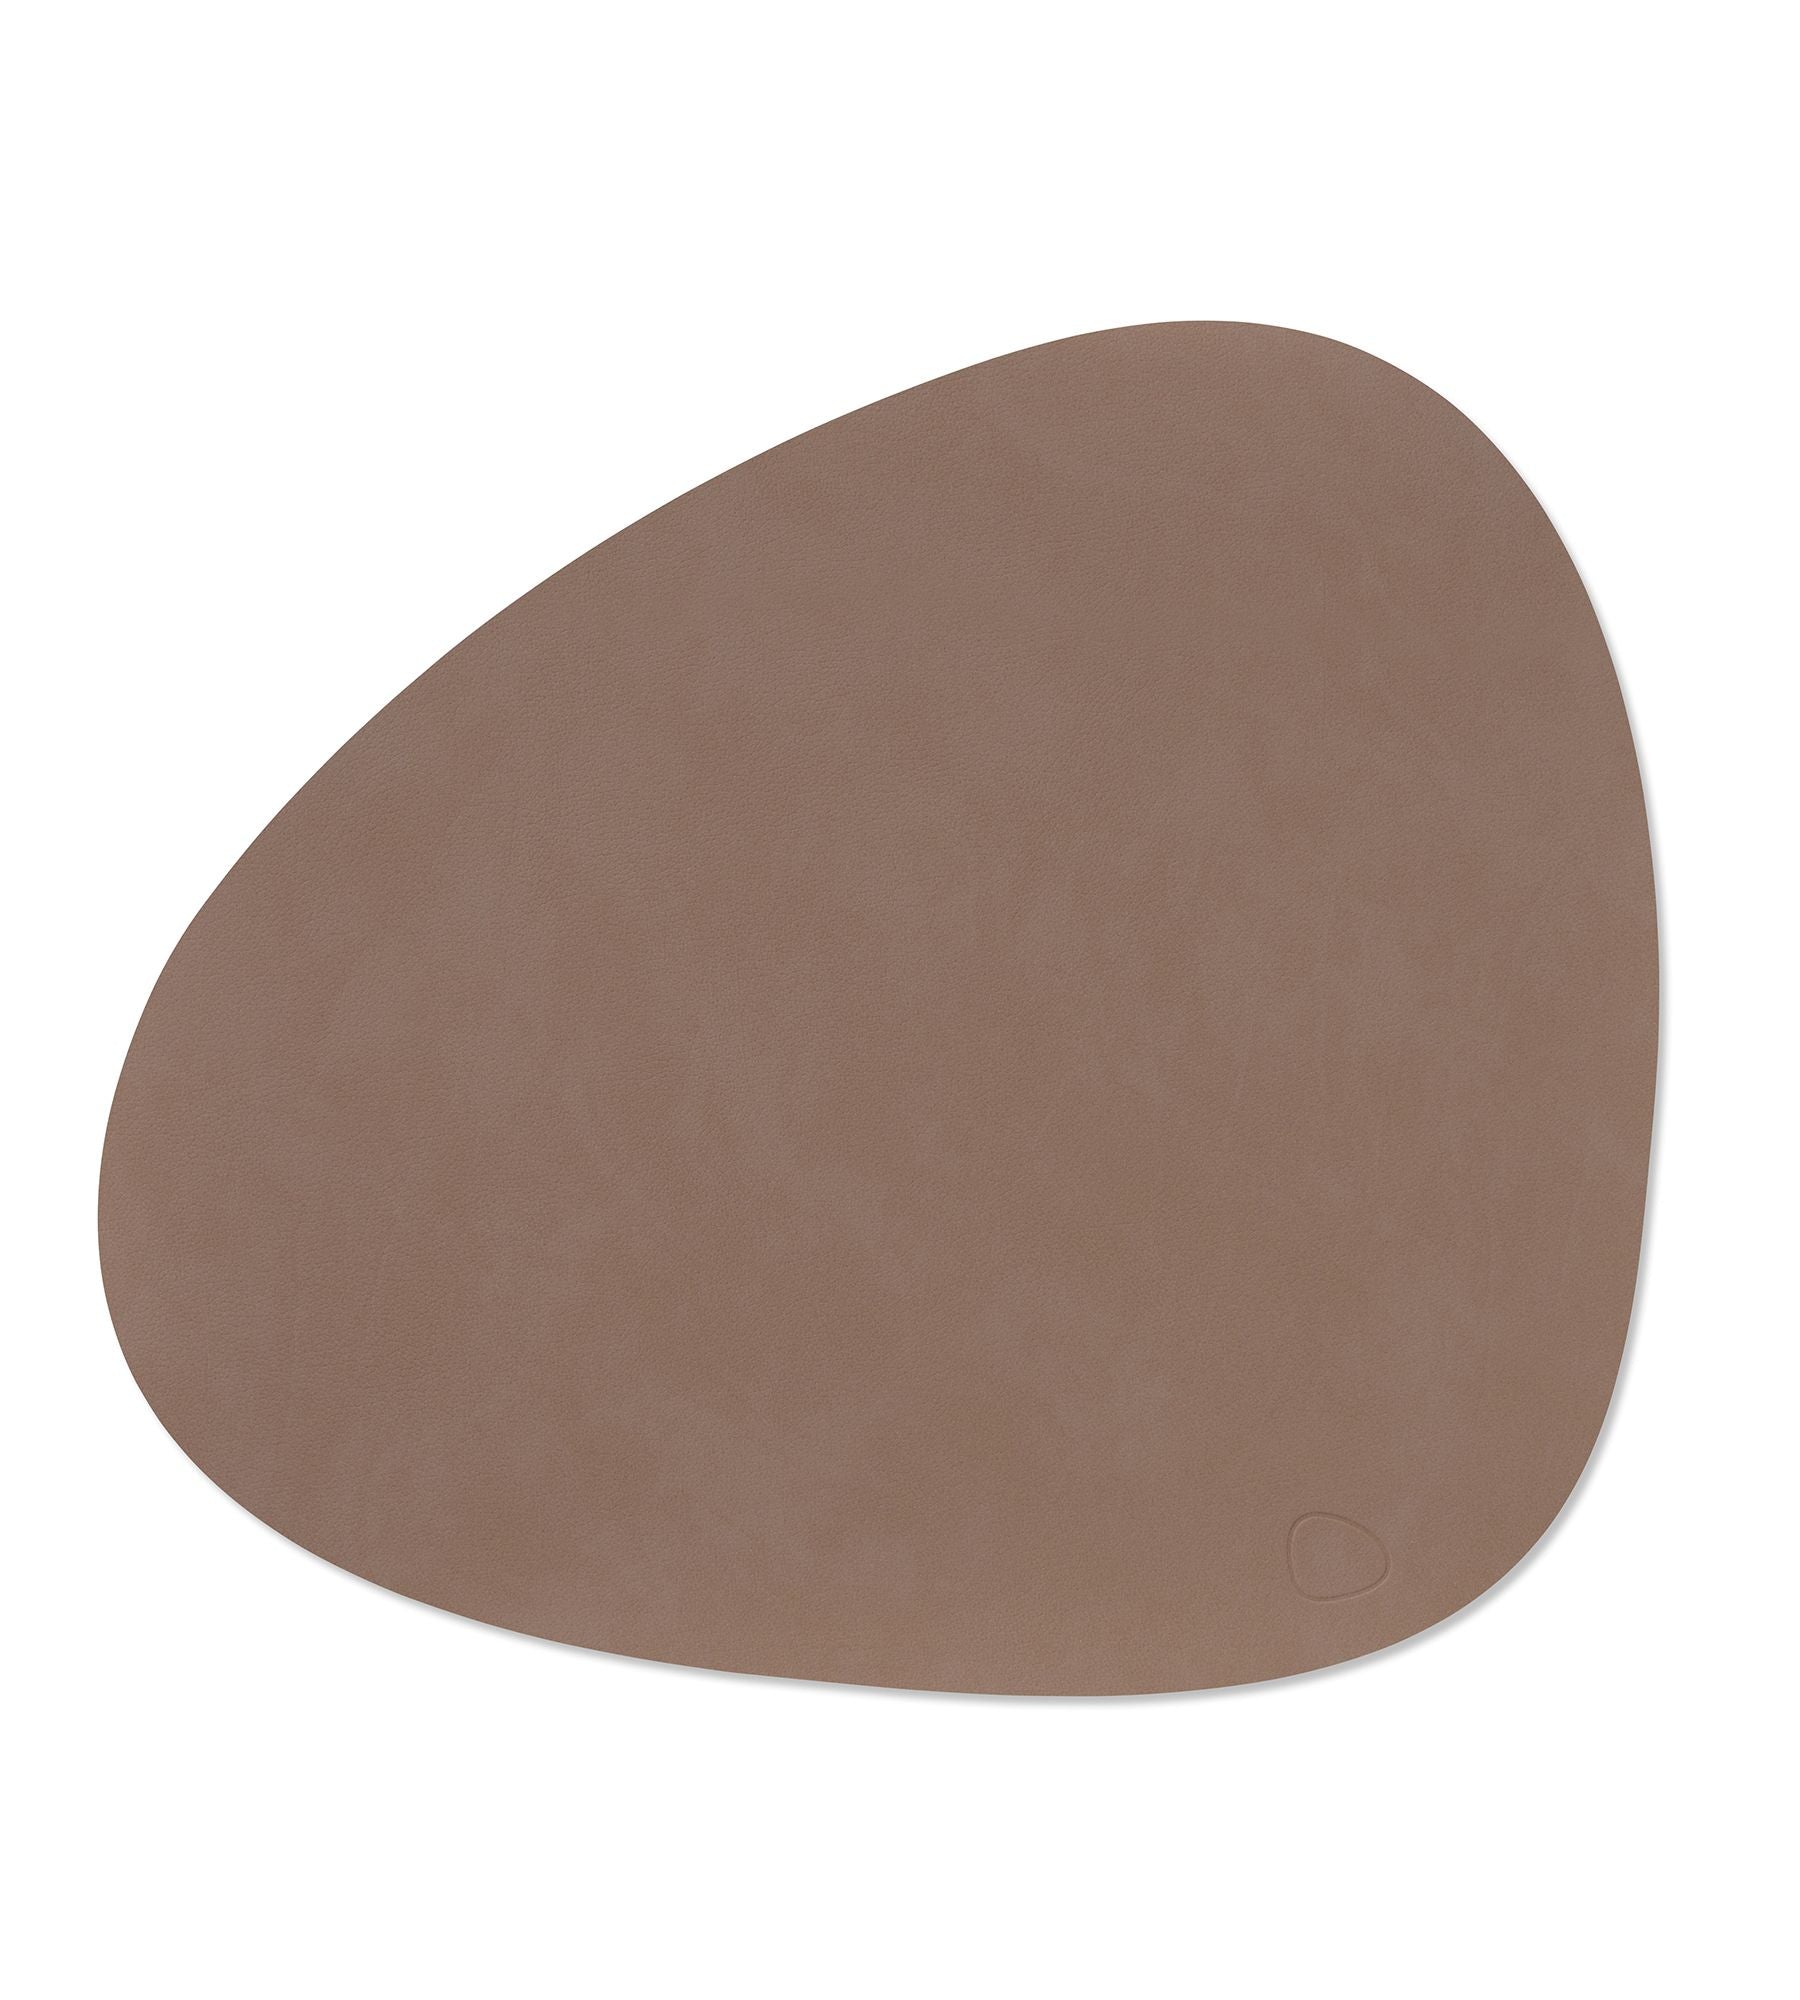 Lind Dna Table Mat Curve Large, Truffle